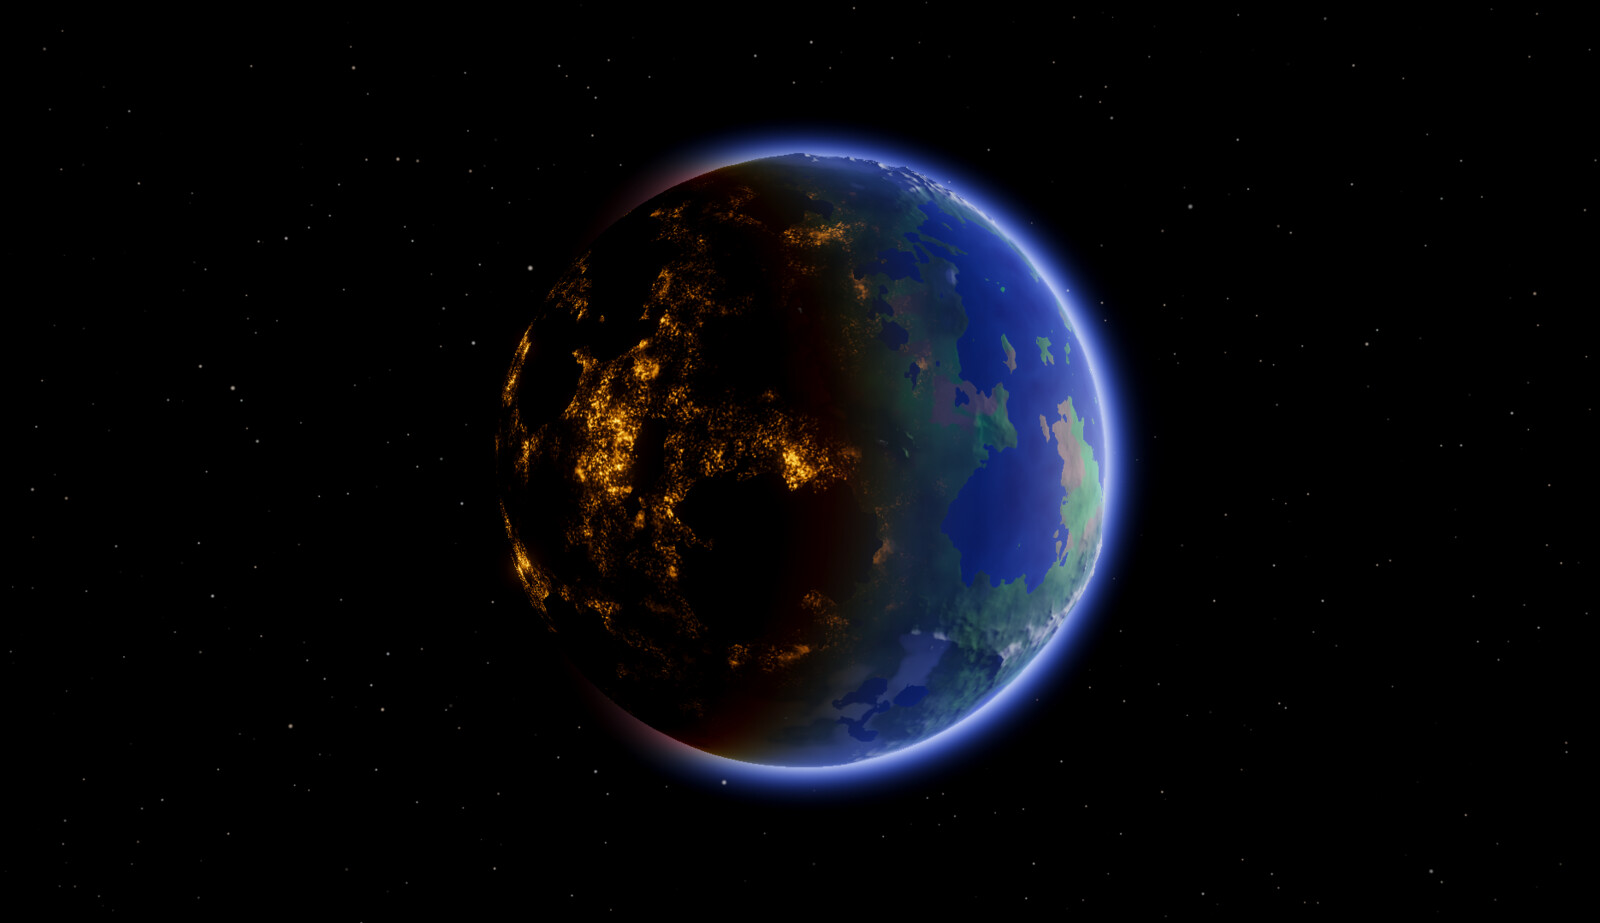 Your regular old earth-like planet. The shader generates light on the dark side of planets using a population slider.